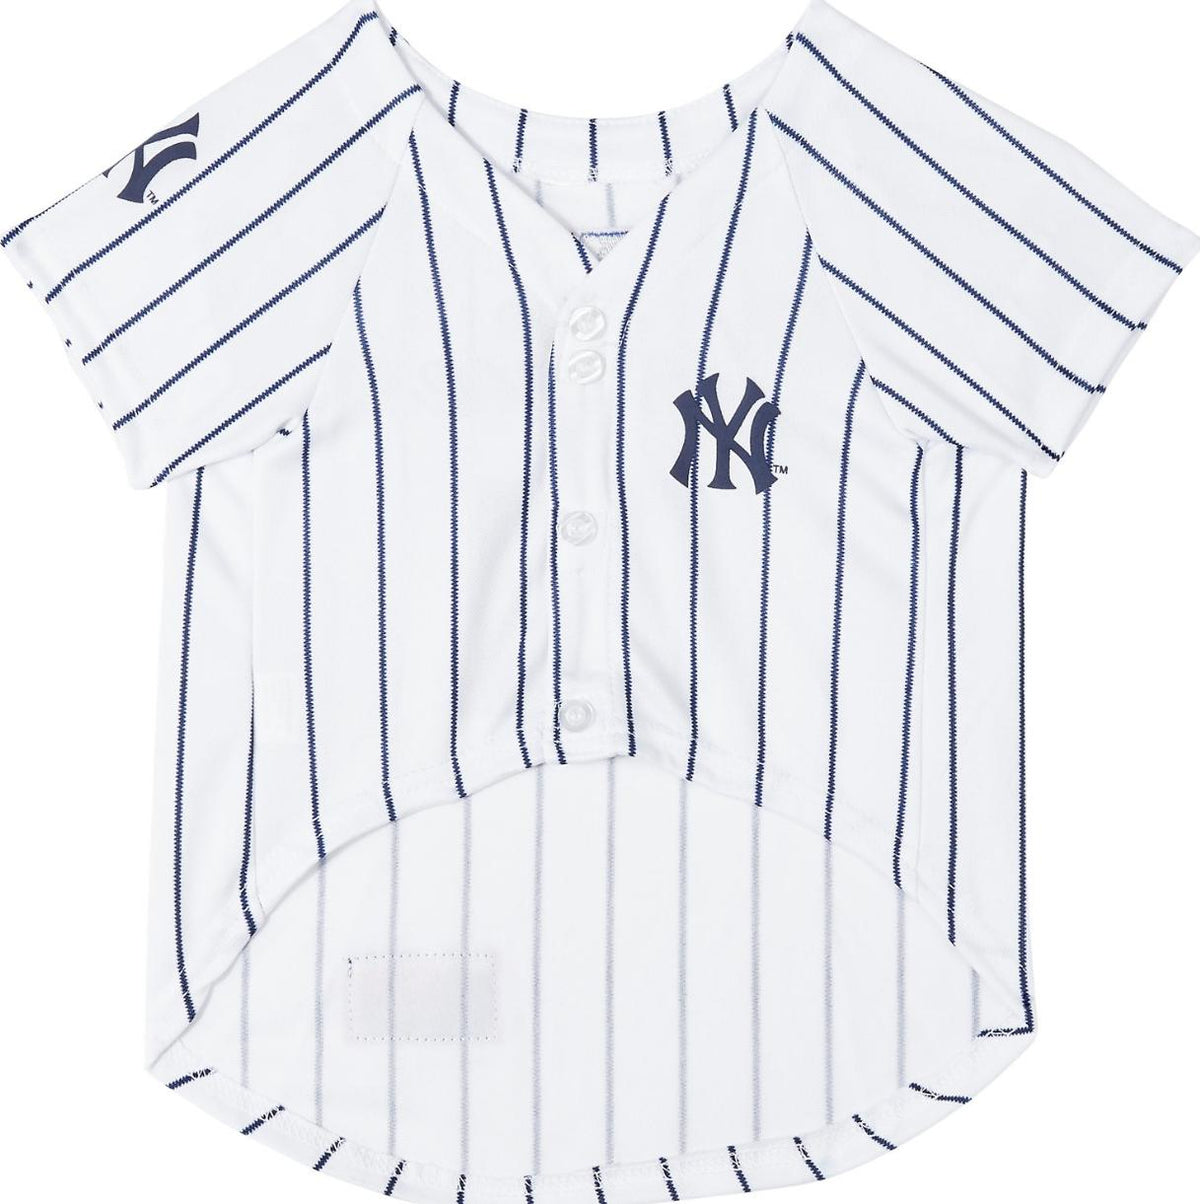 Pets First MLB New York Yankees Mesh Jersey for Dogs and Cats